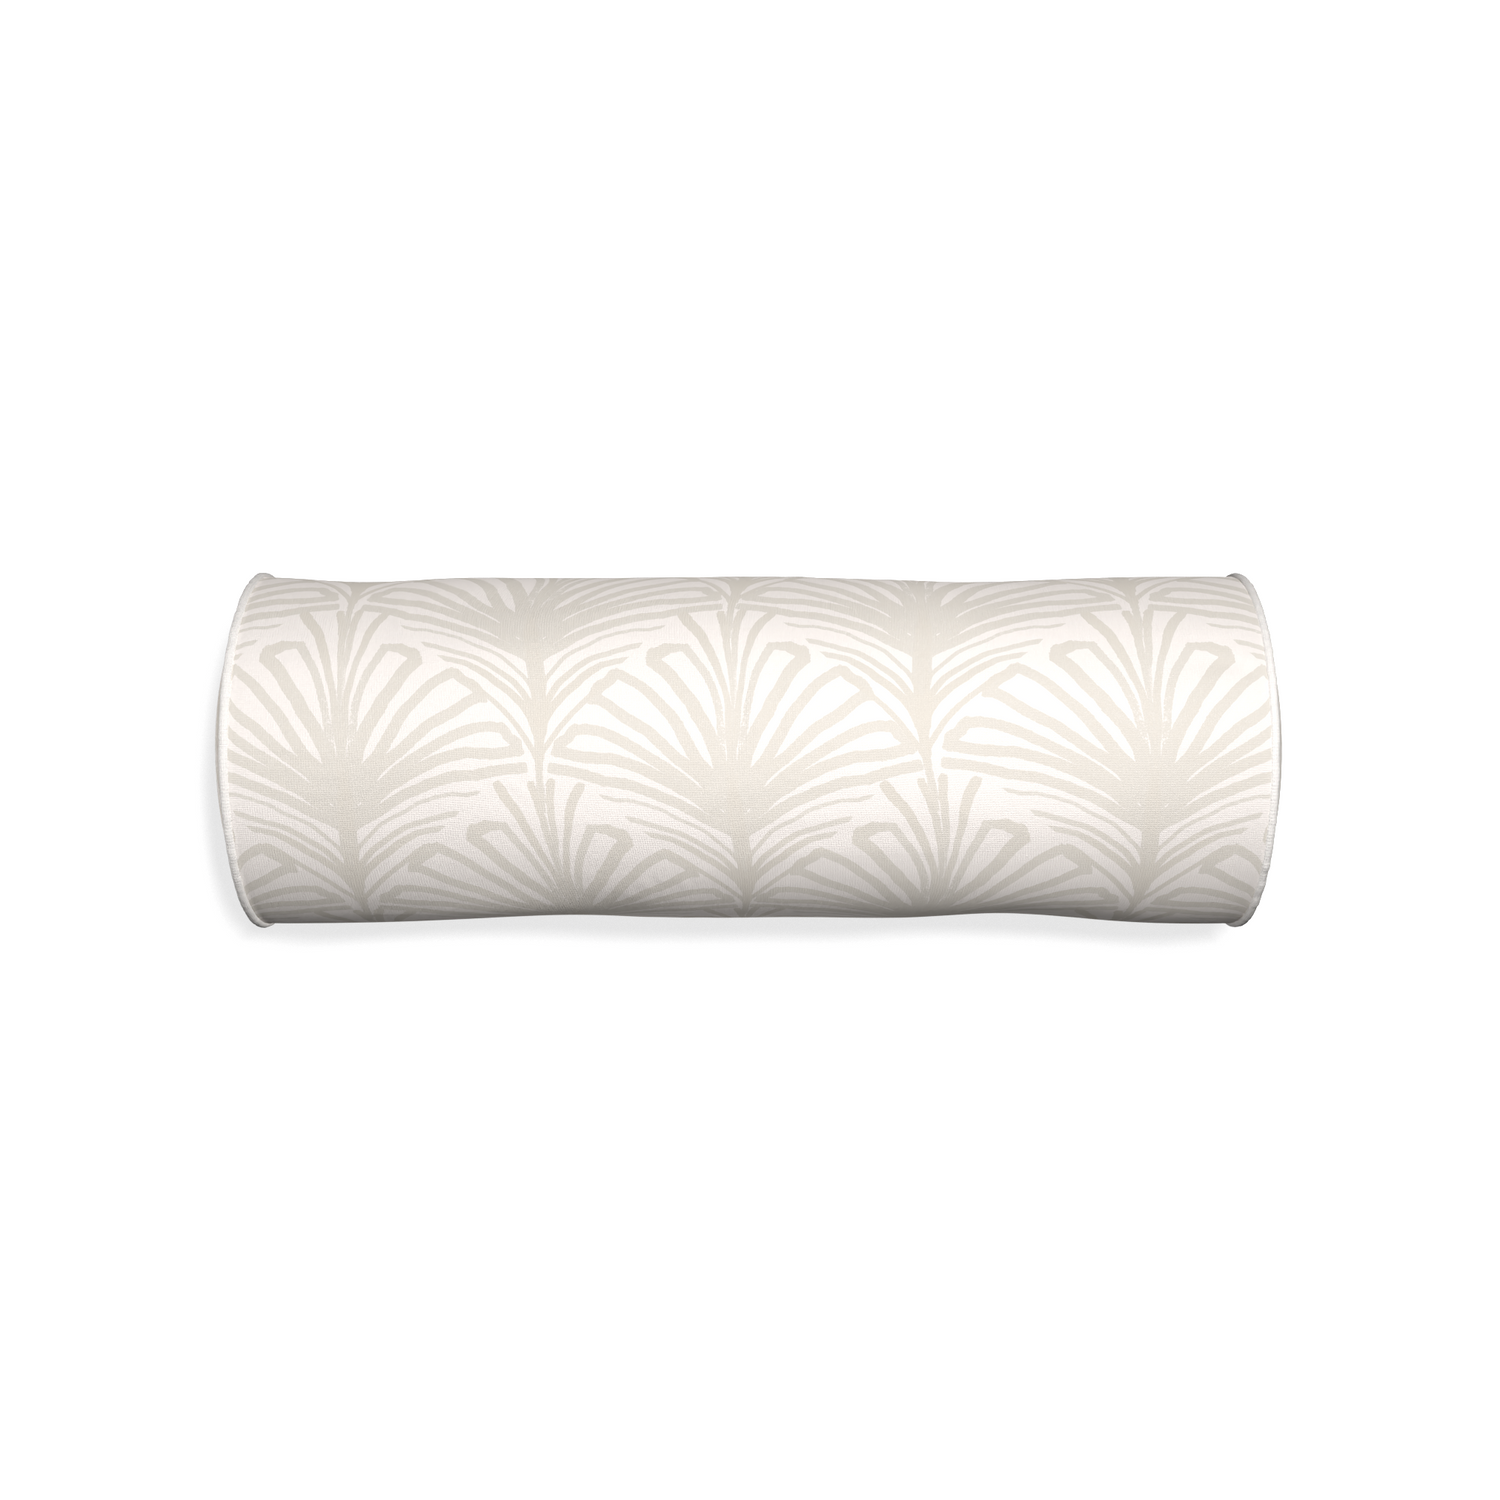 Bolster suzy sand custom pillow with snow piping on white background